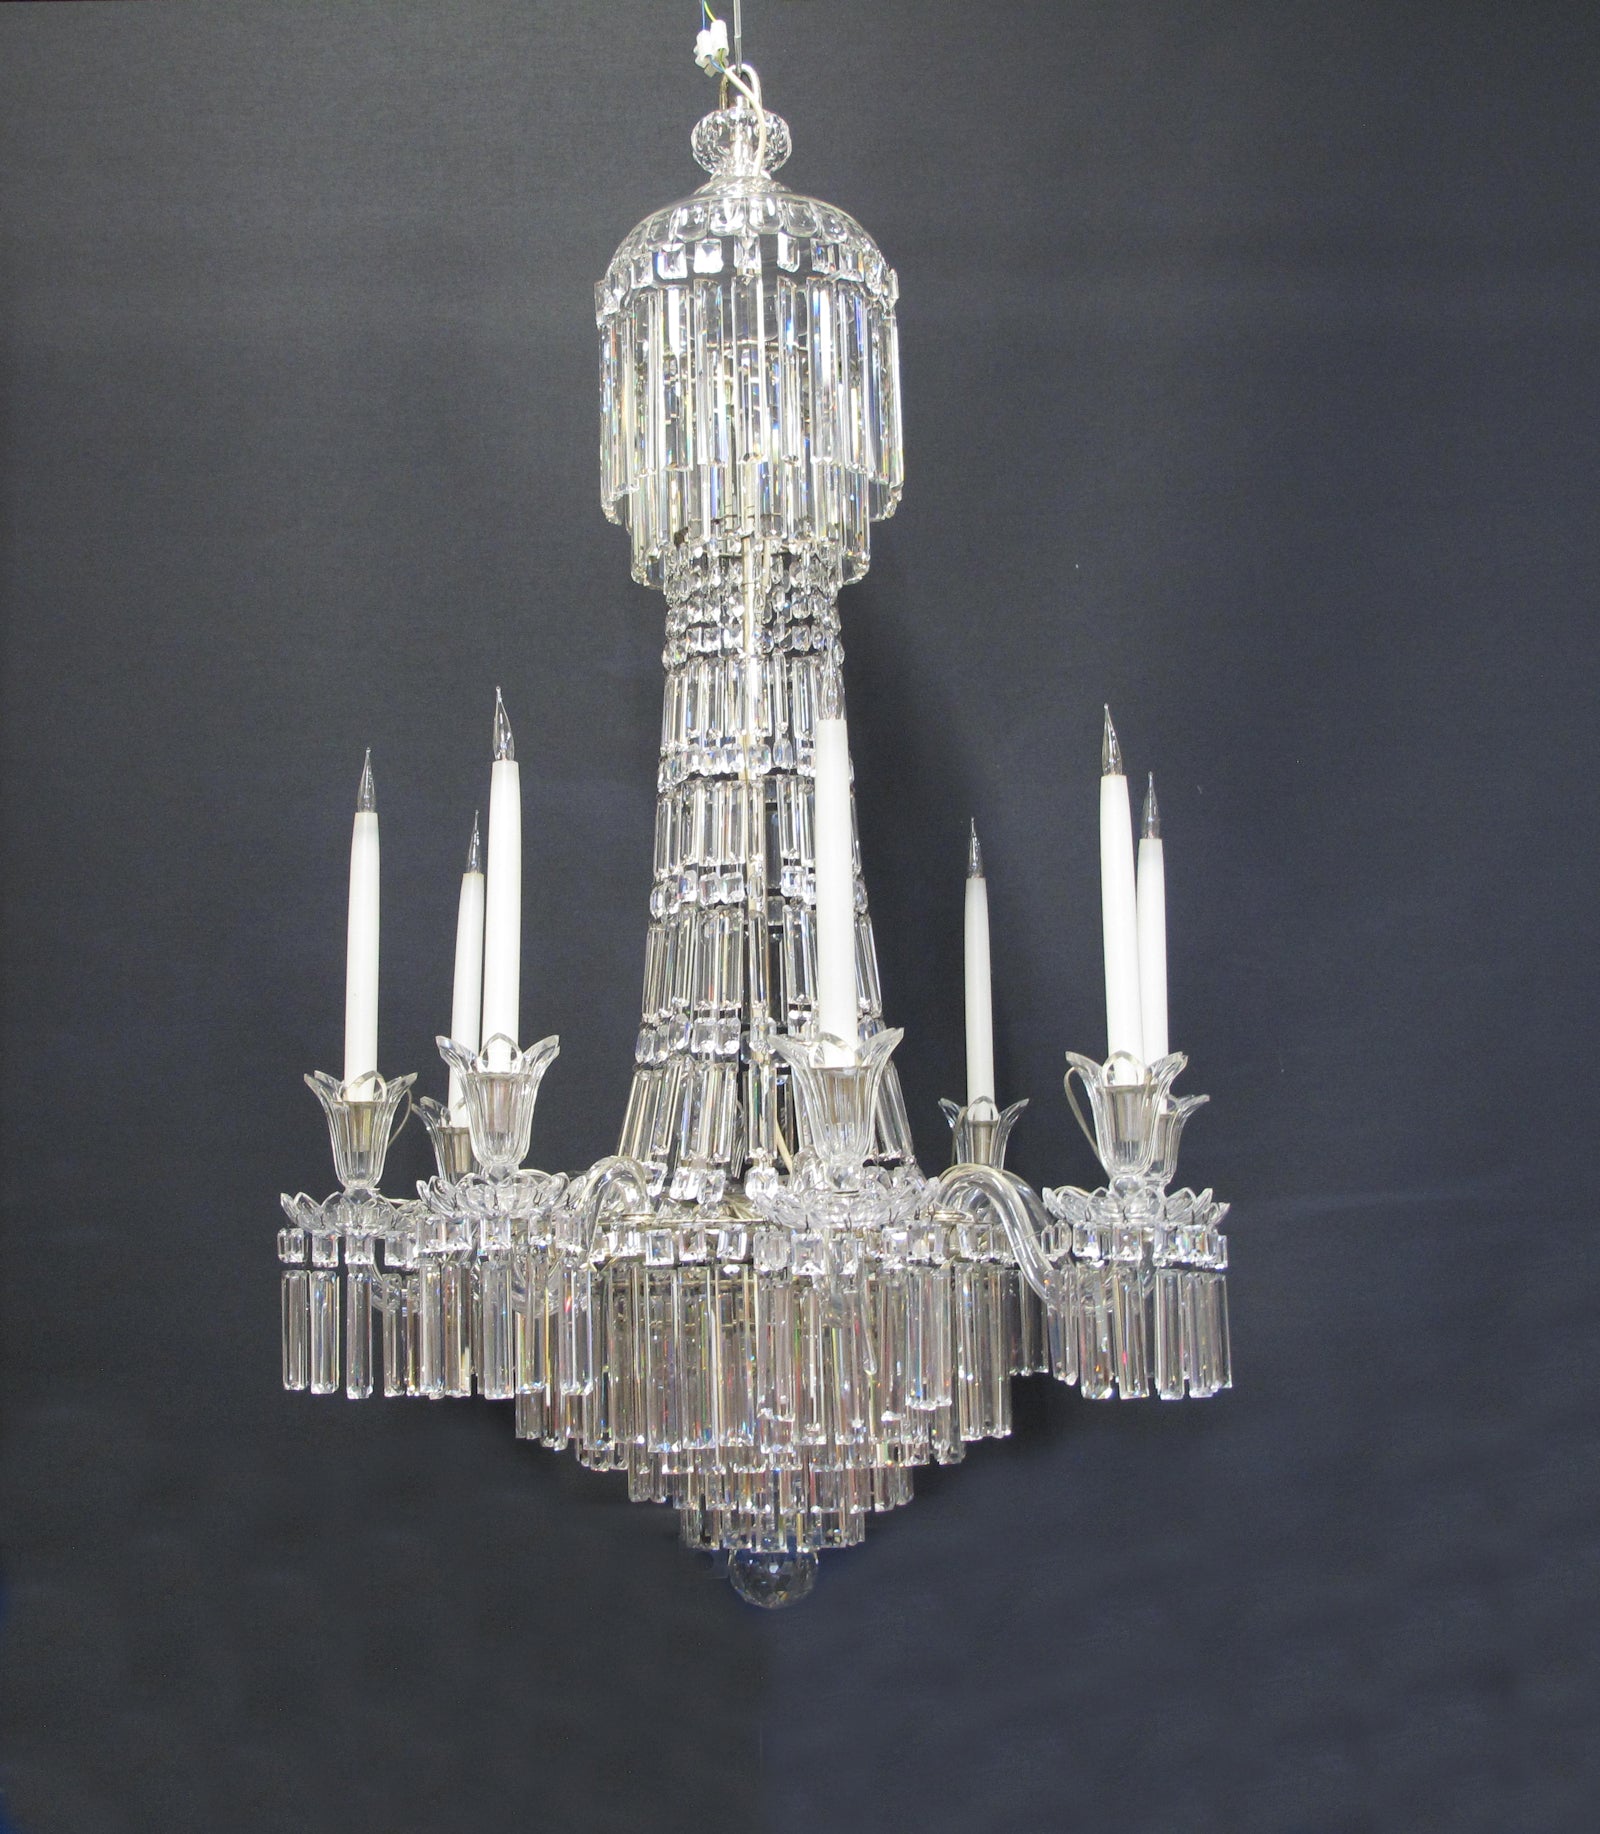 view from front of chandelier